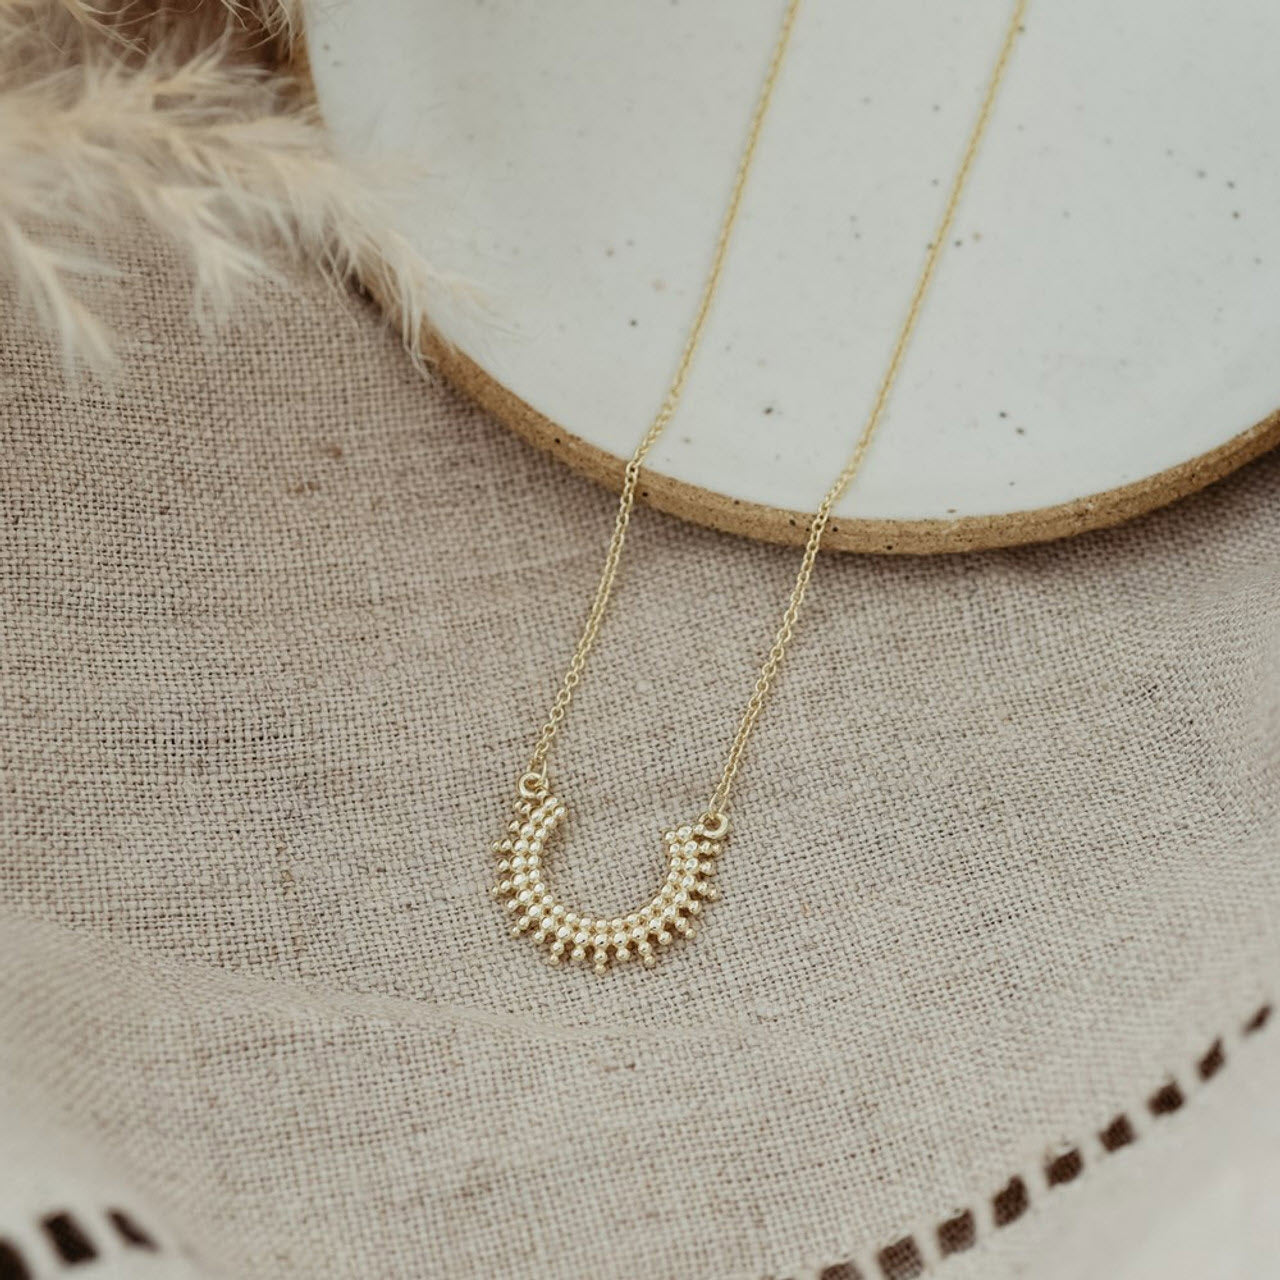 The Glee Curved Luck Necklace Gold displayed on a beige fabric surface, with a ceramic plate in the background. This nickel-free jewelry piece ensures hypoallergenic qualities for sensitive skin.